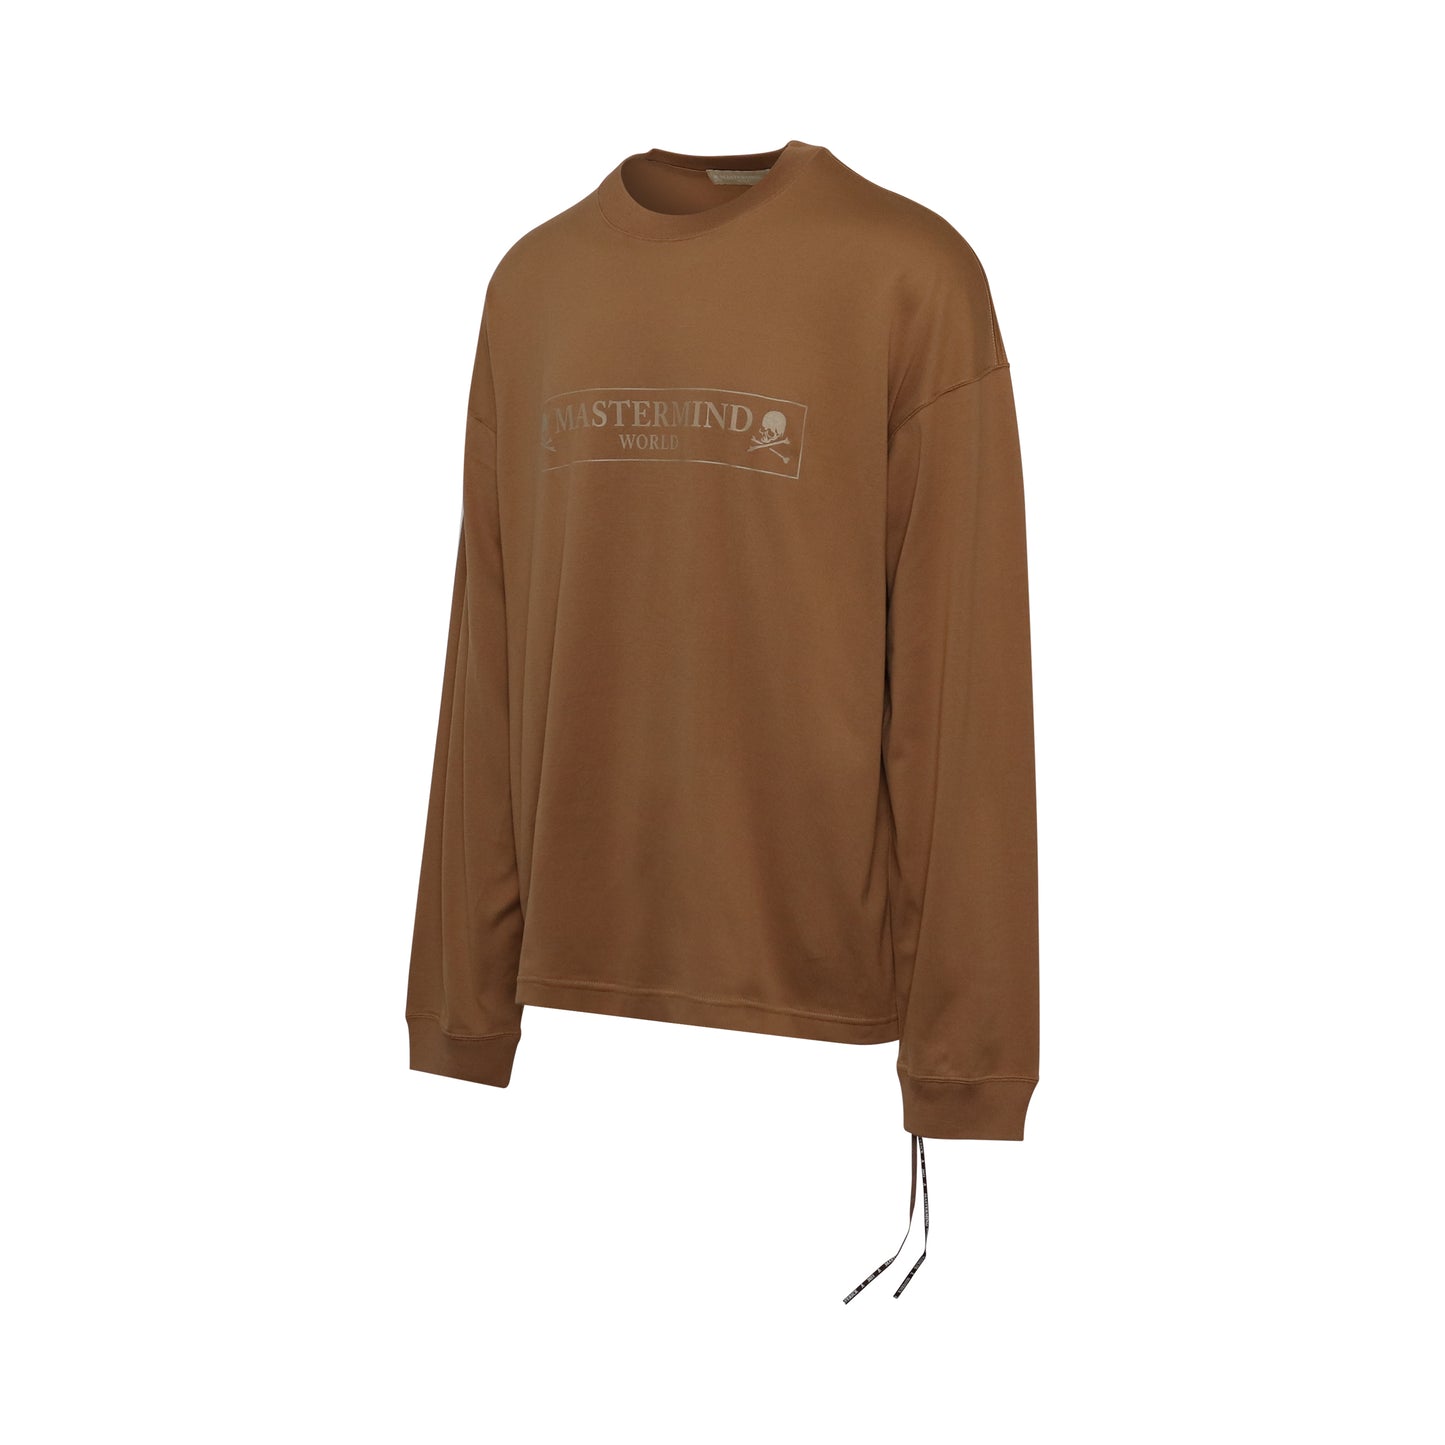 Boxed Logo Long Sleeve Boxy Fit T-Shirt in Camel